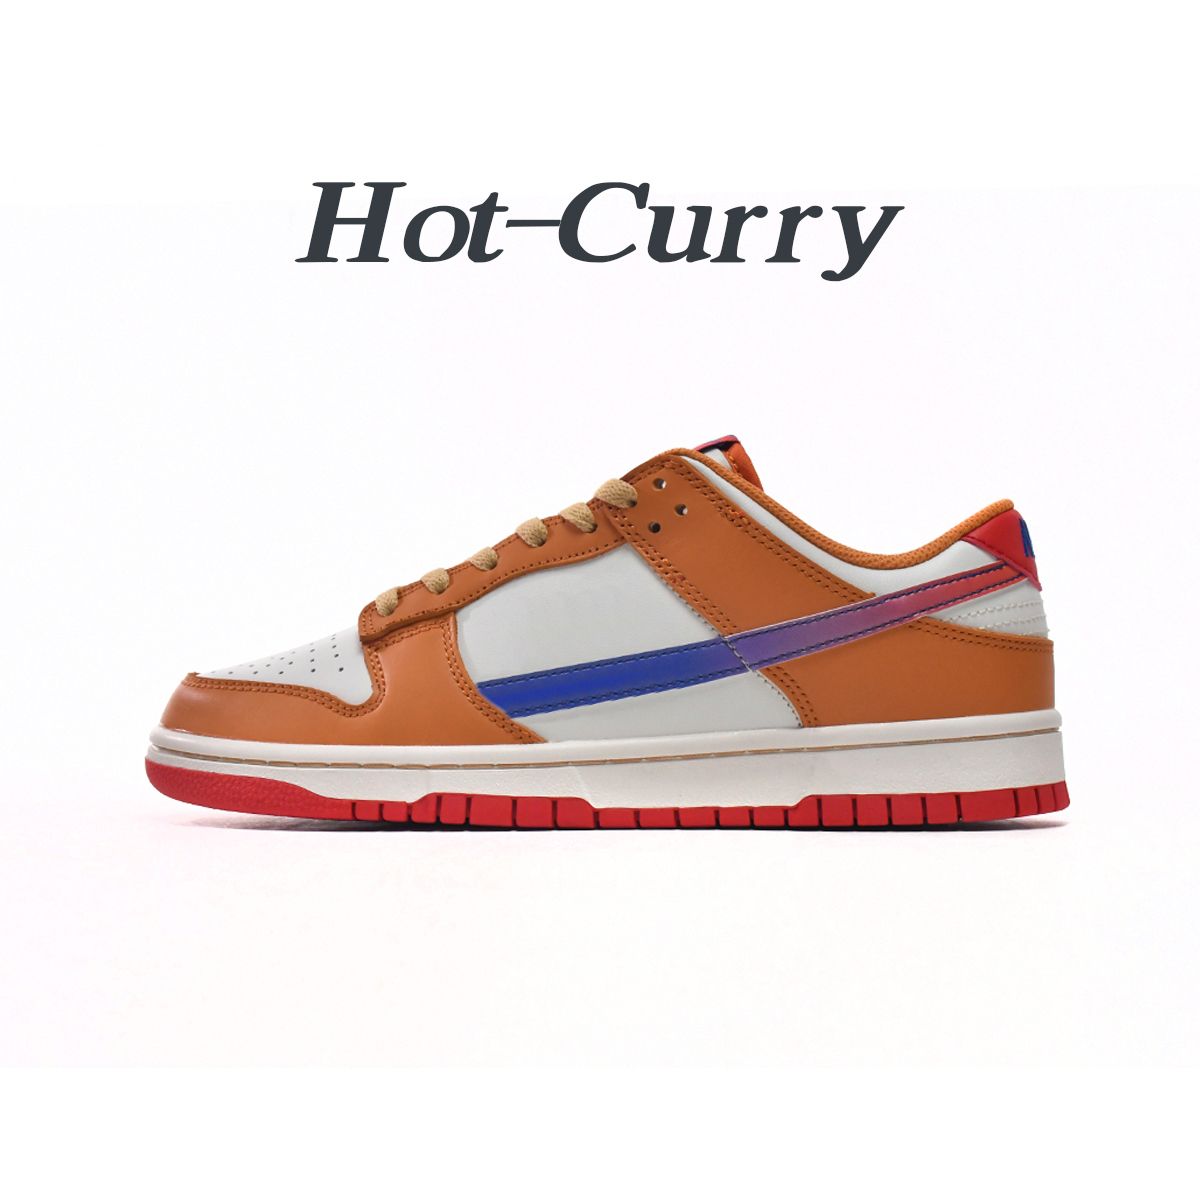 6.Hot-Curry